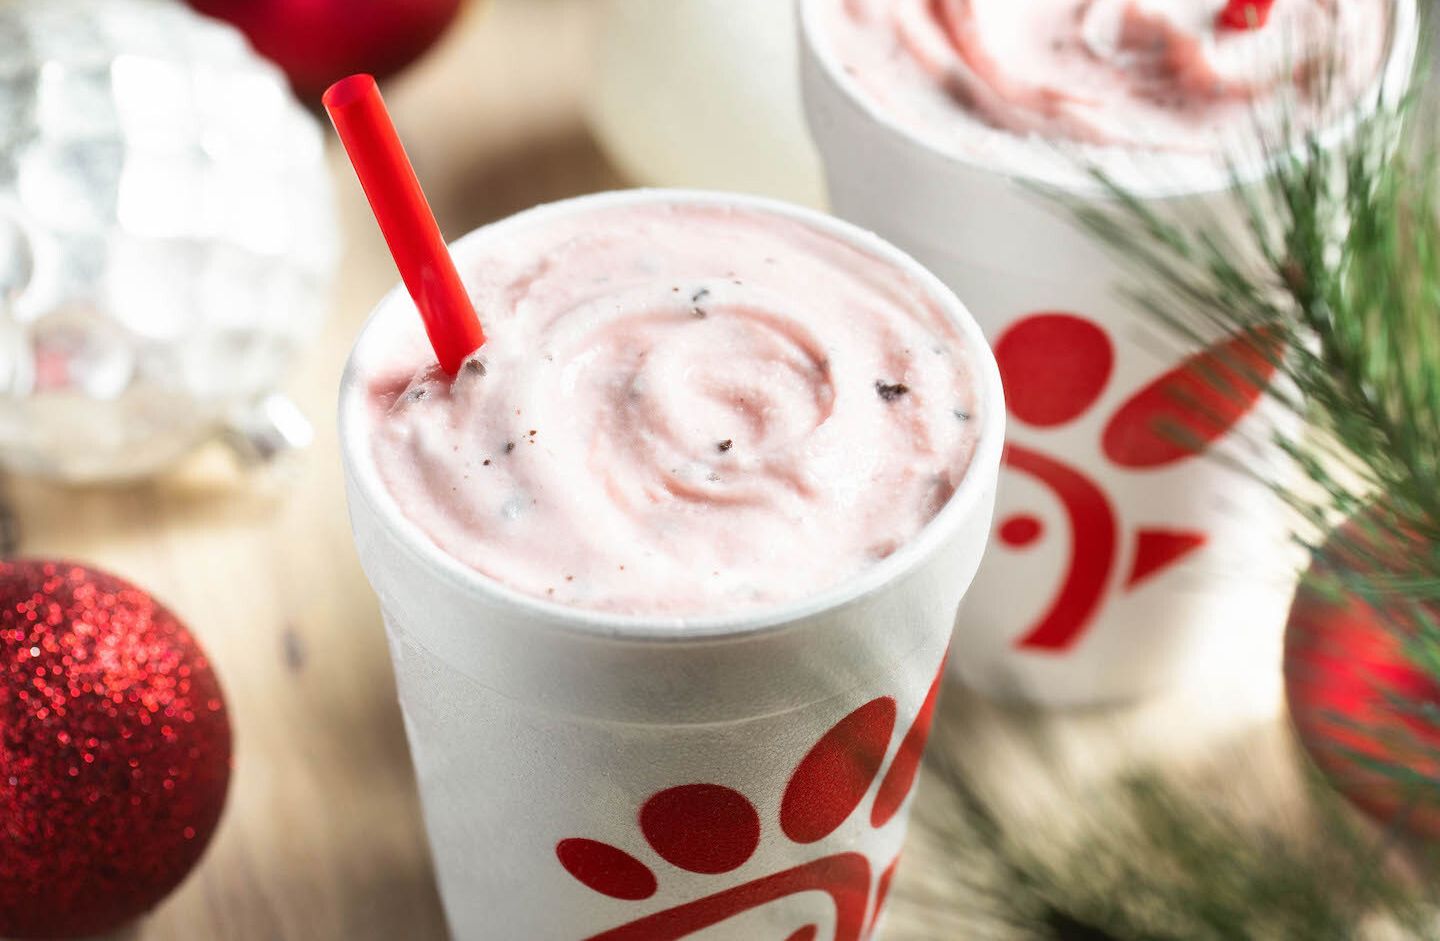 The Classic Peppermint Chip Milkshake Arrives at Chick-fil-A for a Short Time Only